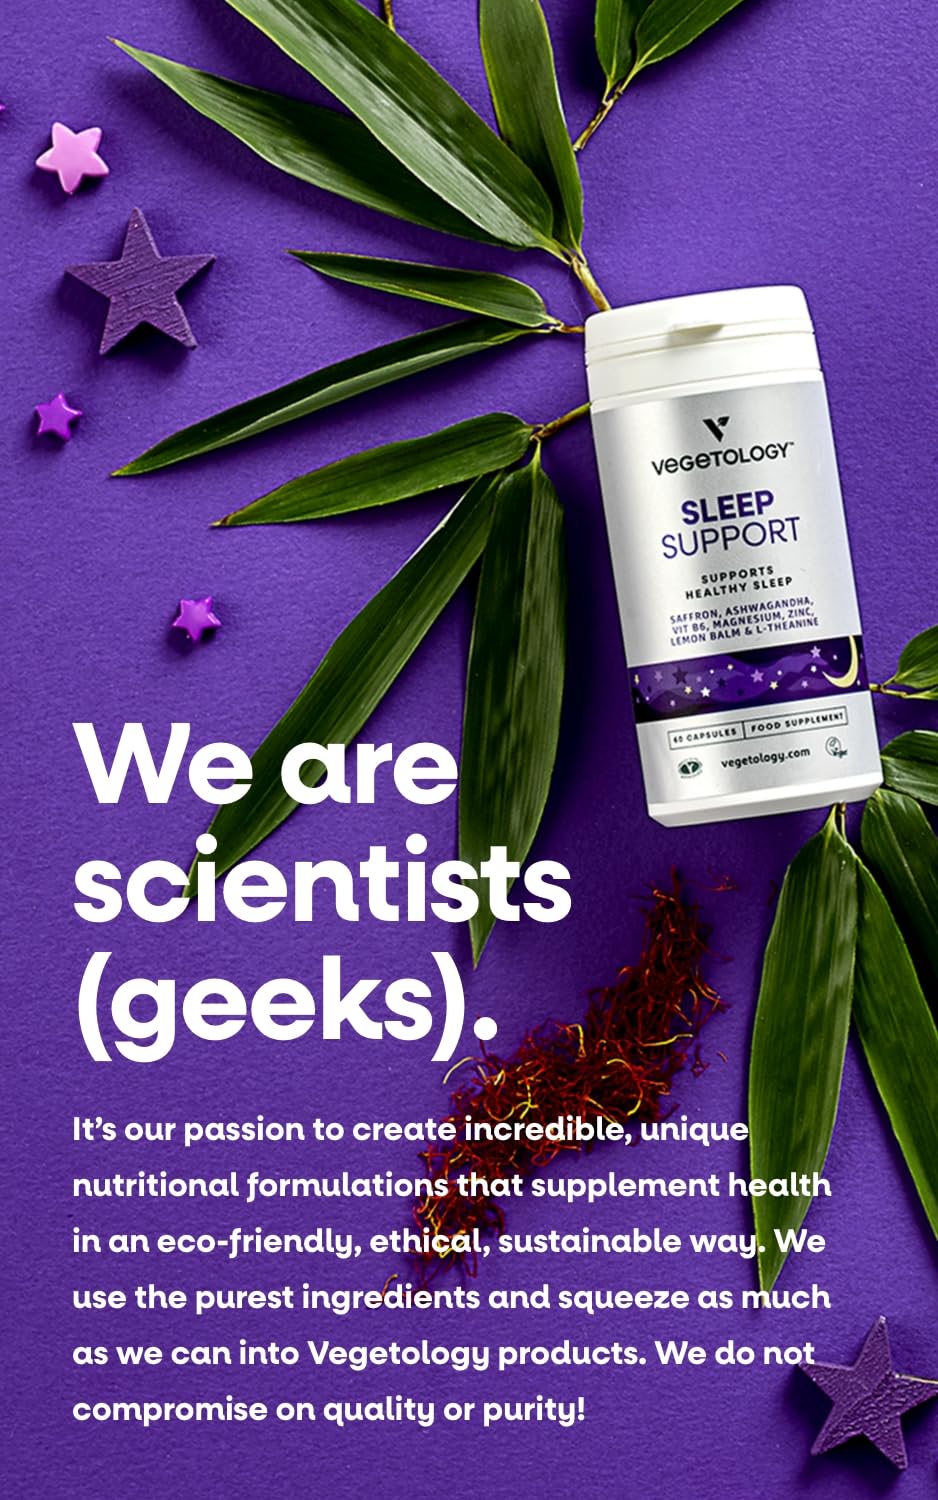 Vegetology Sleep Support | Natural Sleep Aid with Saffron, Ashwagandha & Lemon Balm | Scientifically Formulated for Deep Rest | 100% Vegan & Made in UK | Ethical & Sustainably Sourced